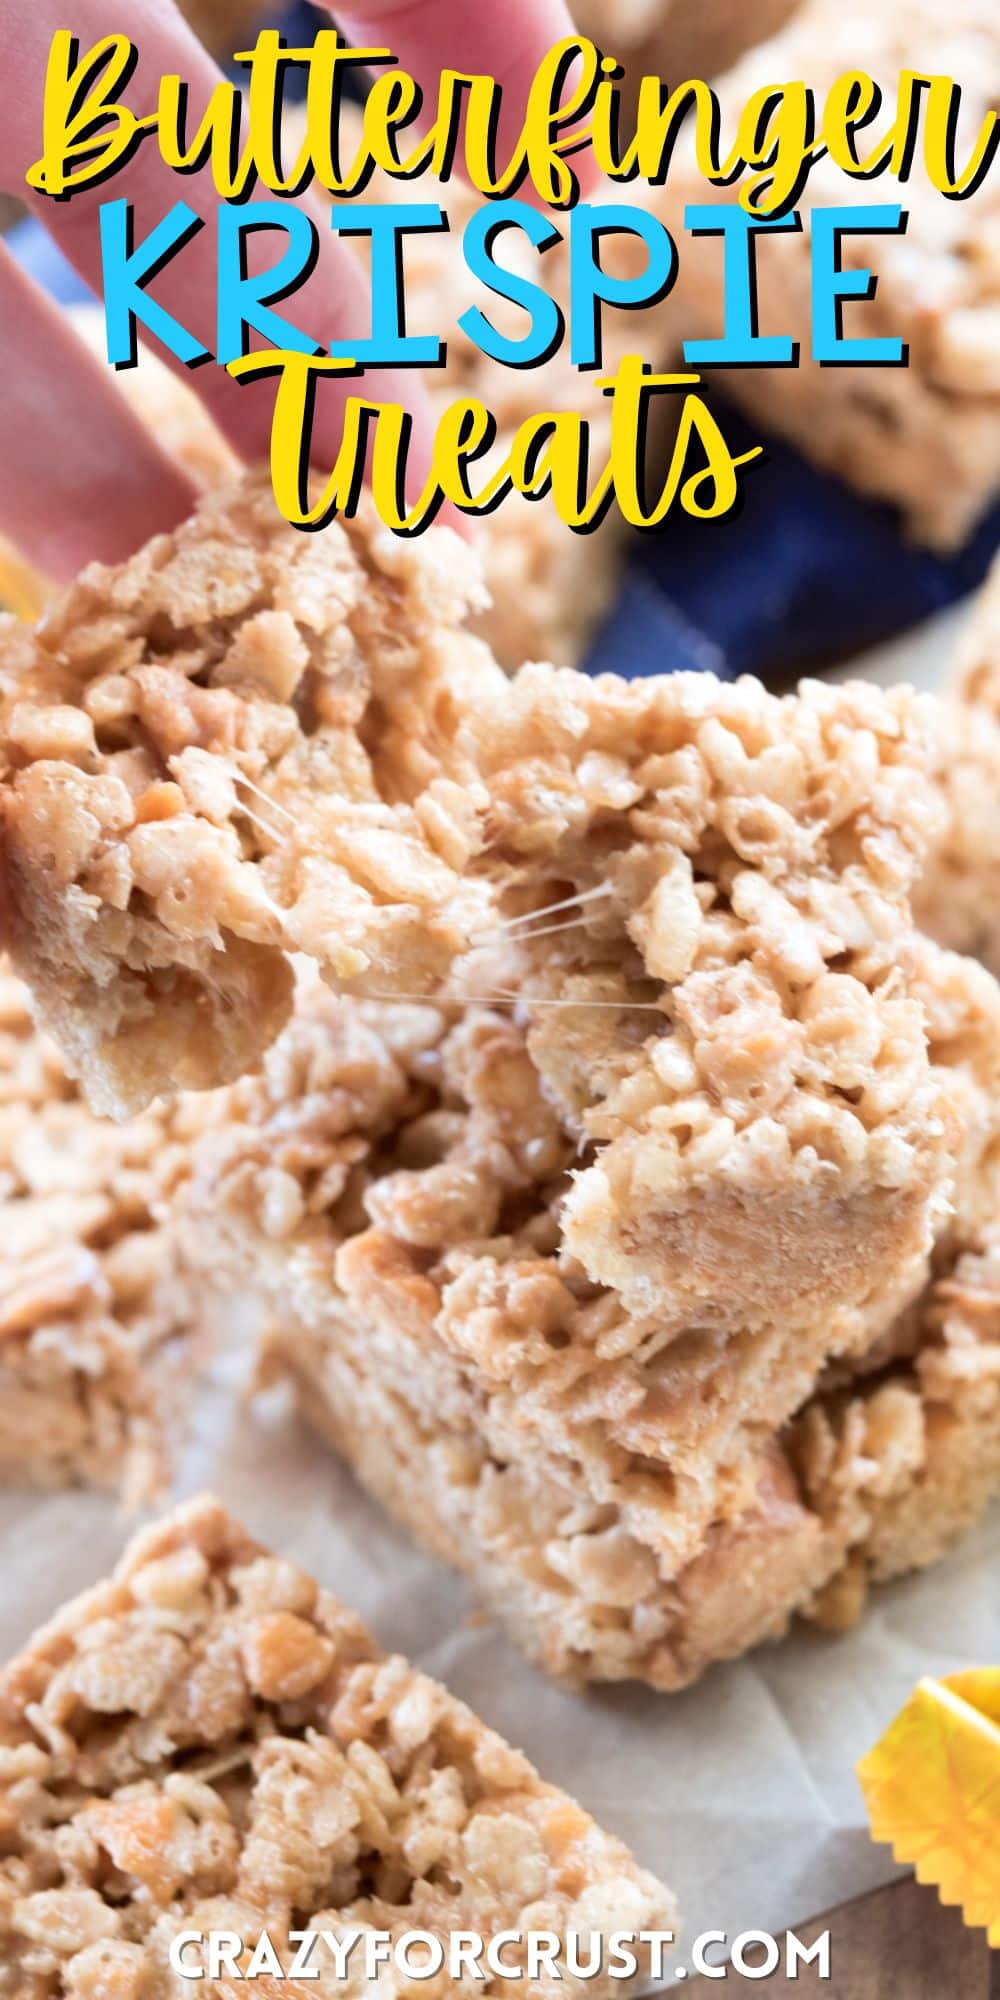 stacked Rice Krispie treats with butterfingers spread around with words on the image.